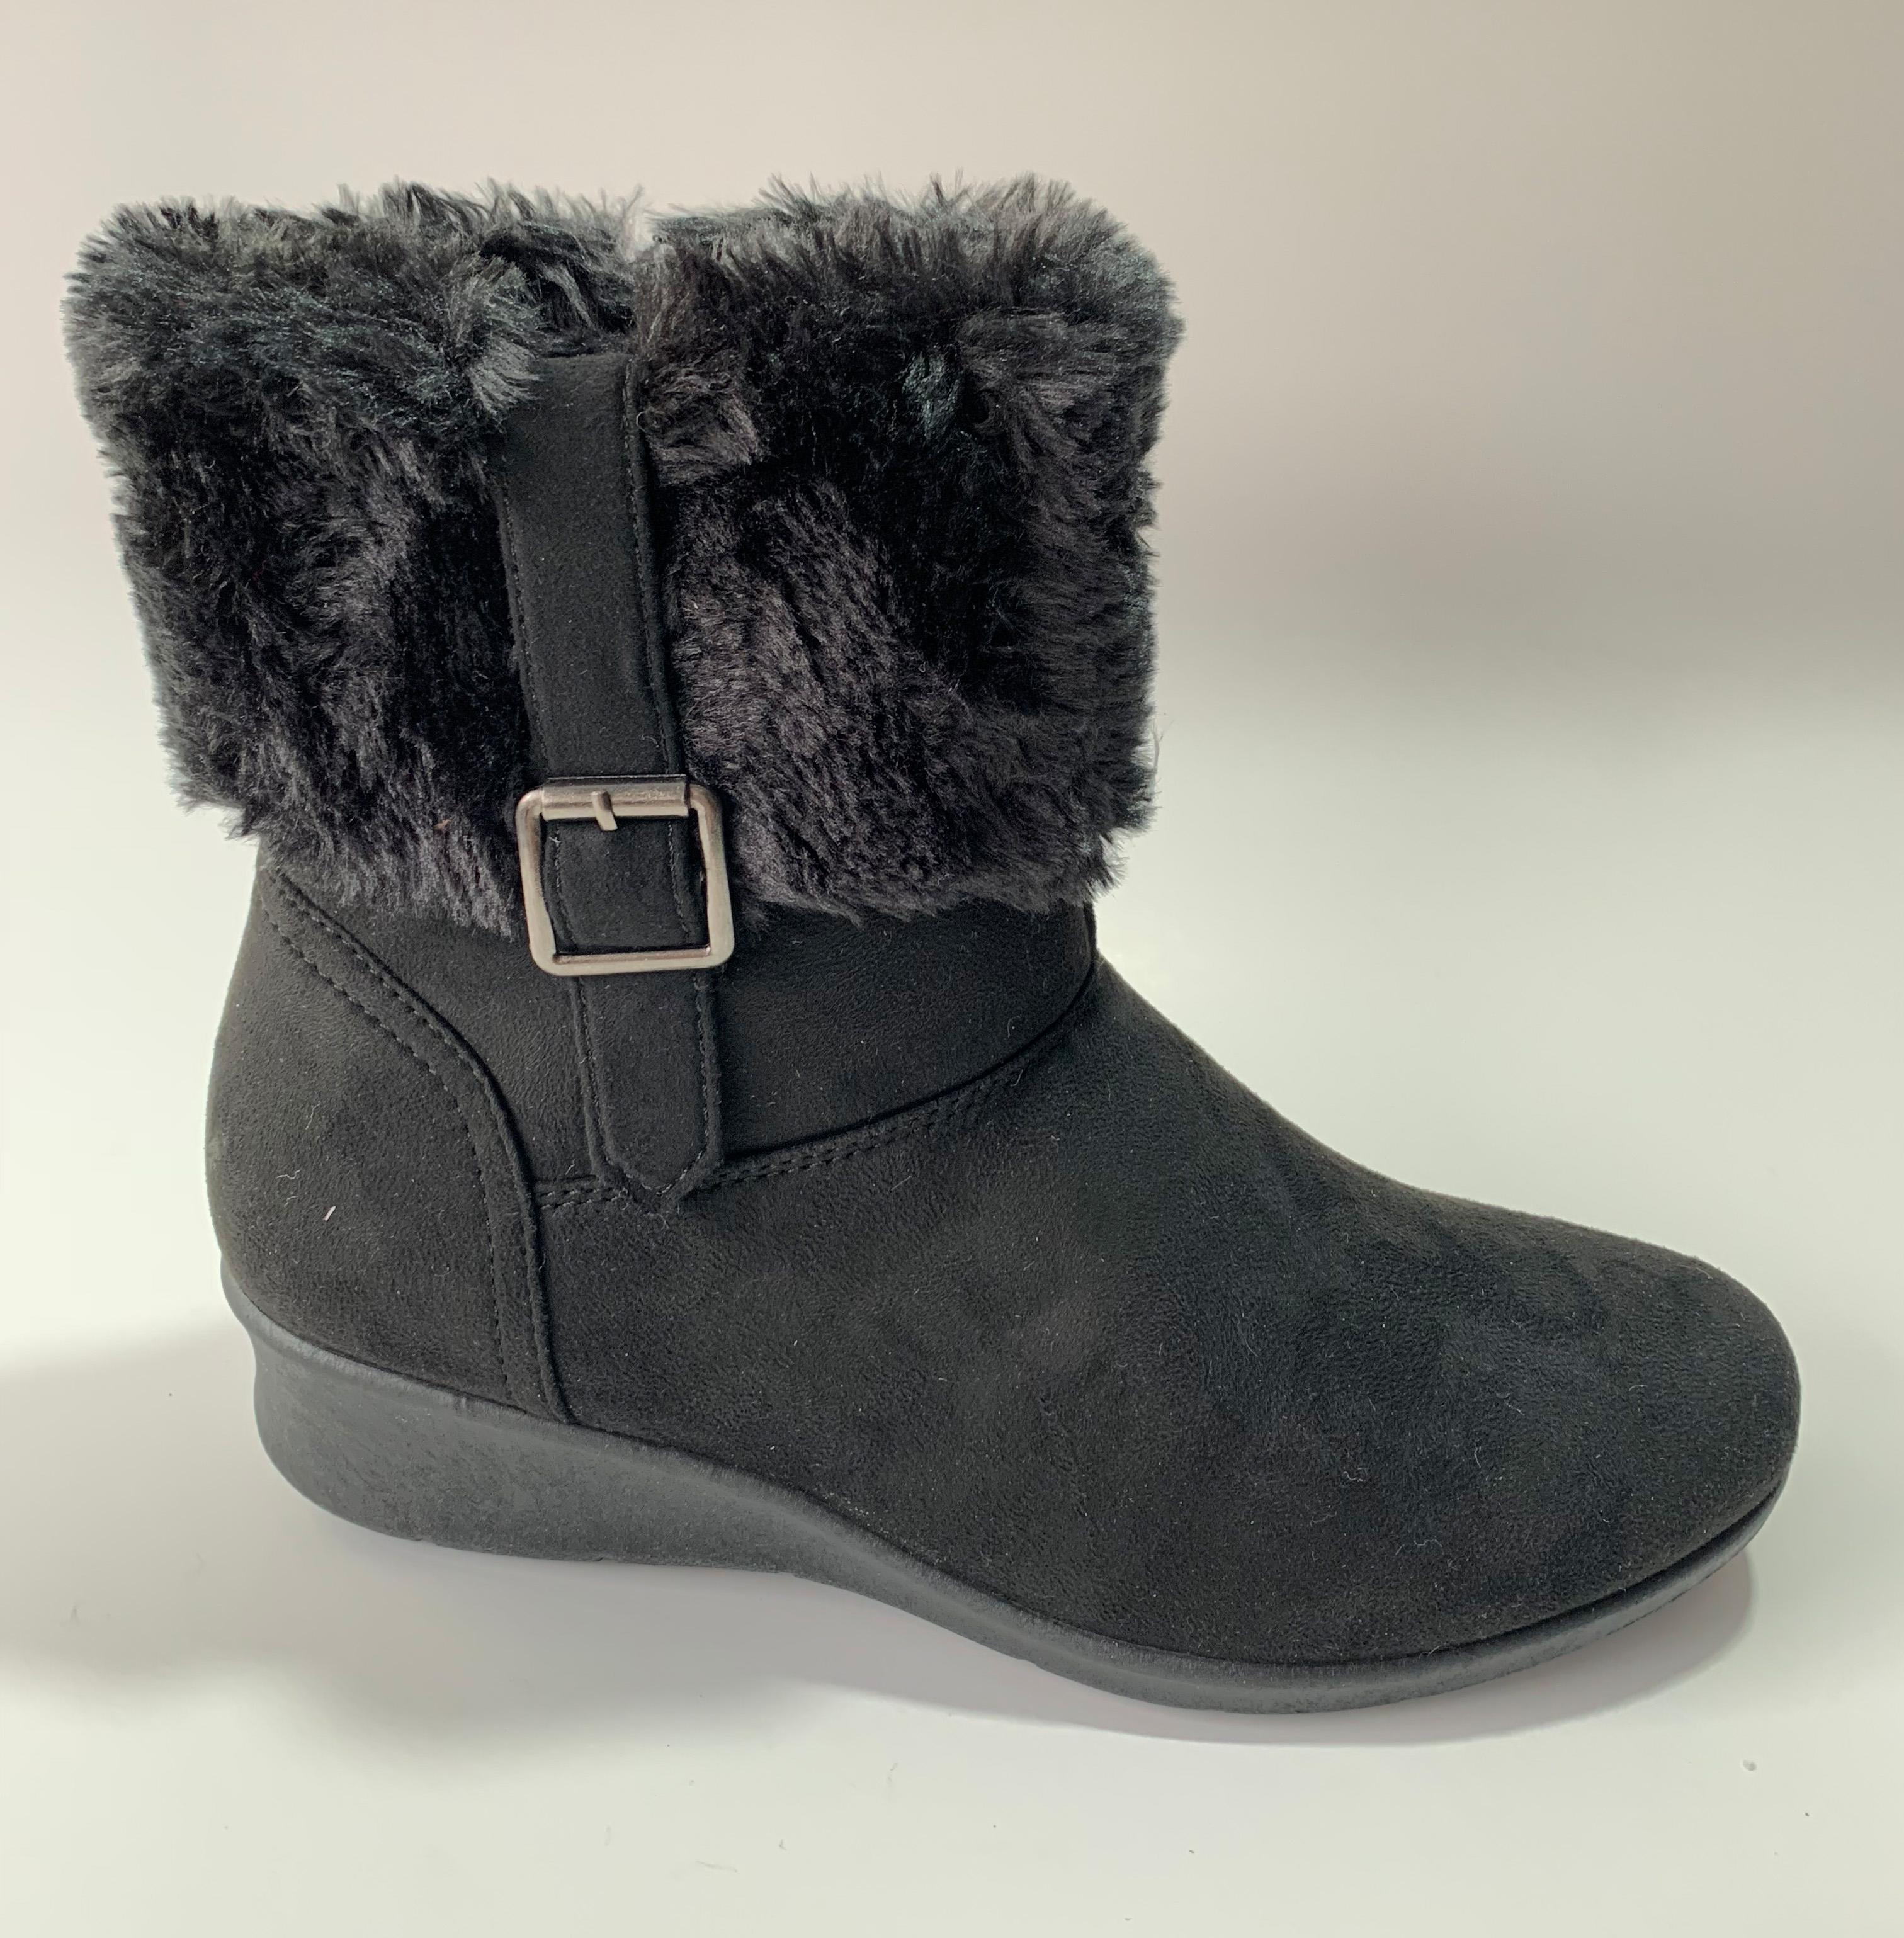 Women Warm Short Boots Round Toe Winter Snow Ankle Booties 